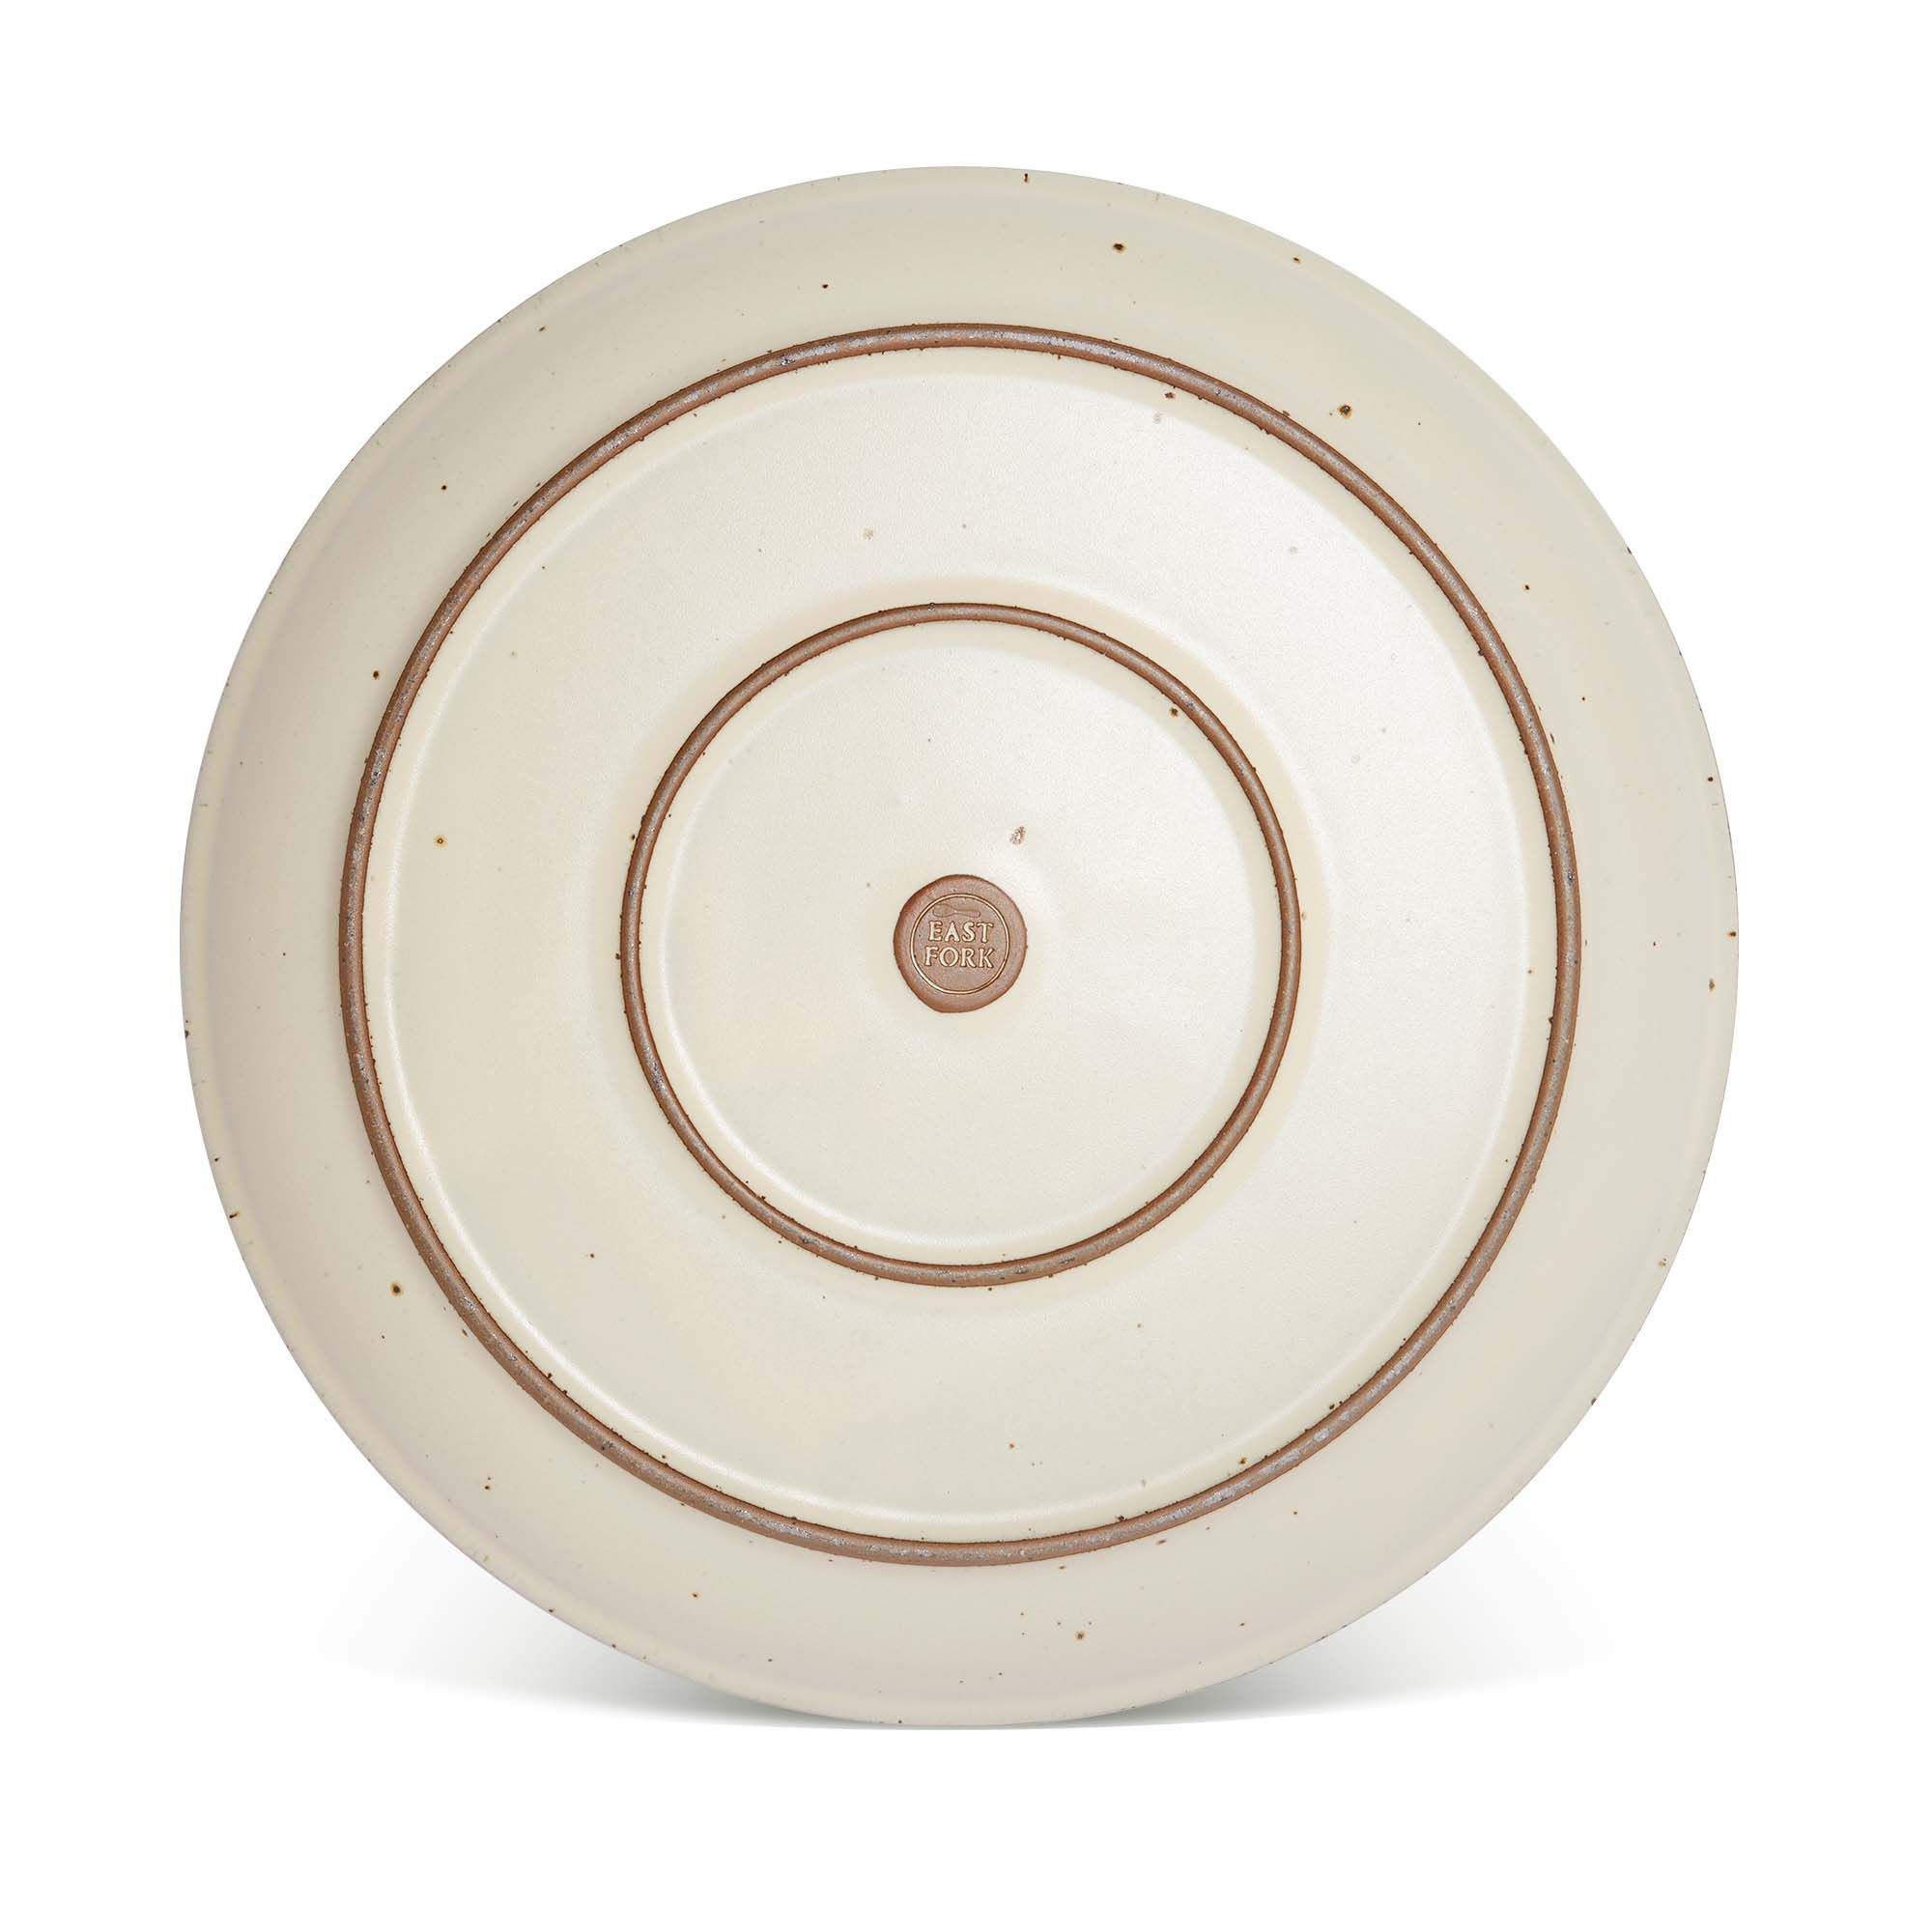 Bottom of a large ceramic platter in a warm, tan-toned, off-white color featuring iron speckles and an unglazed rim